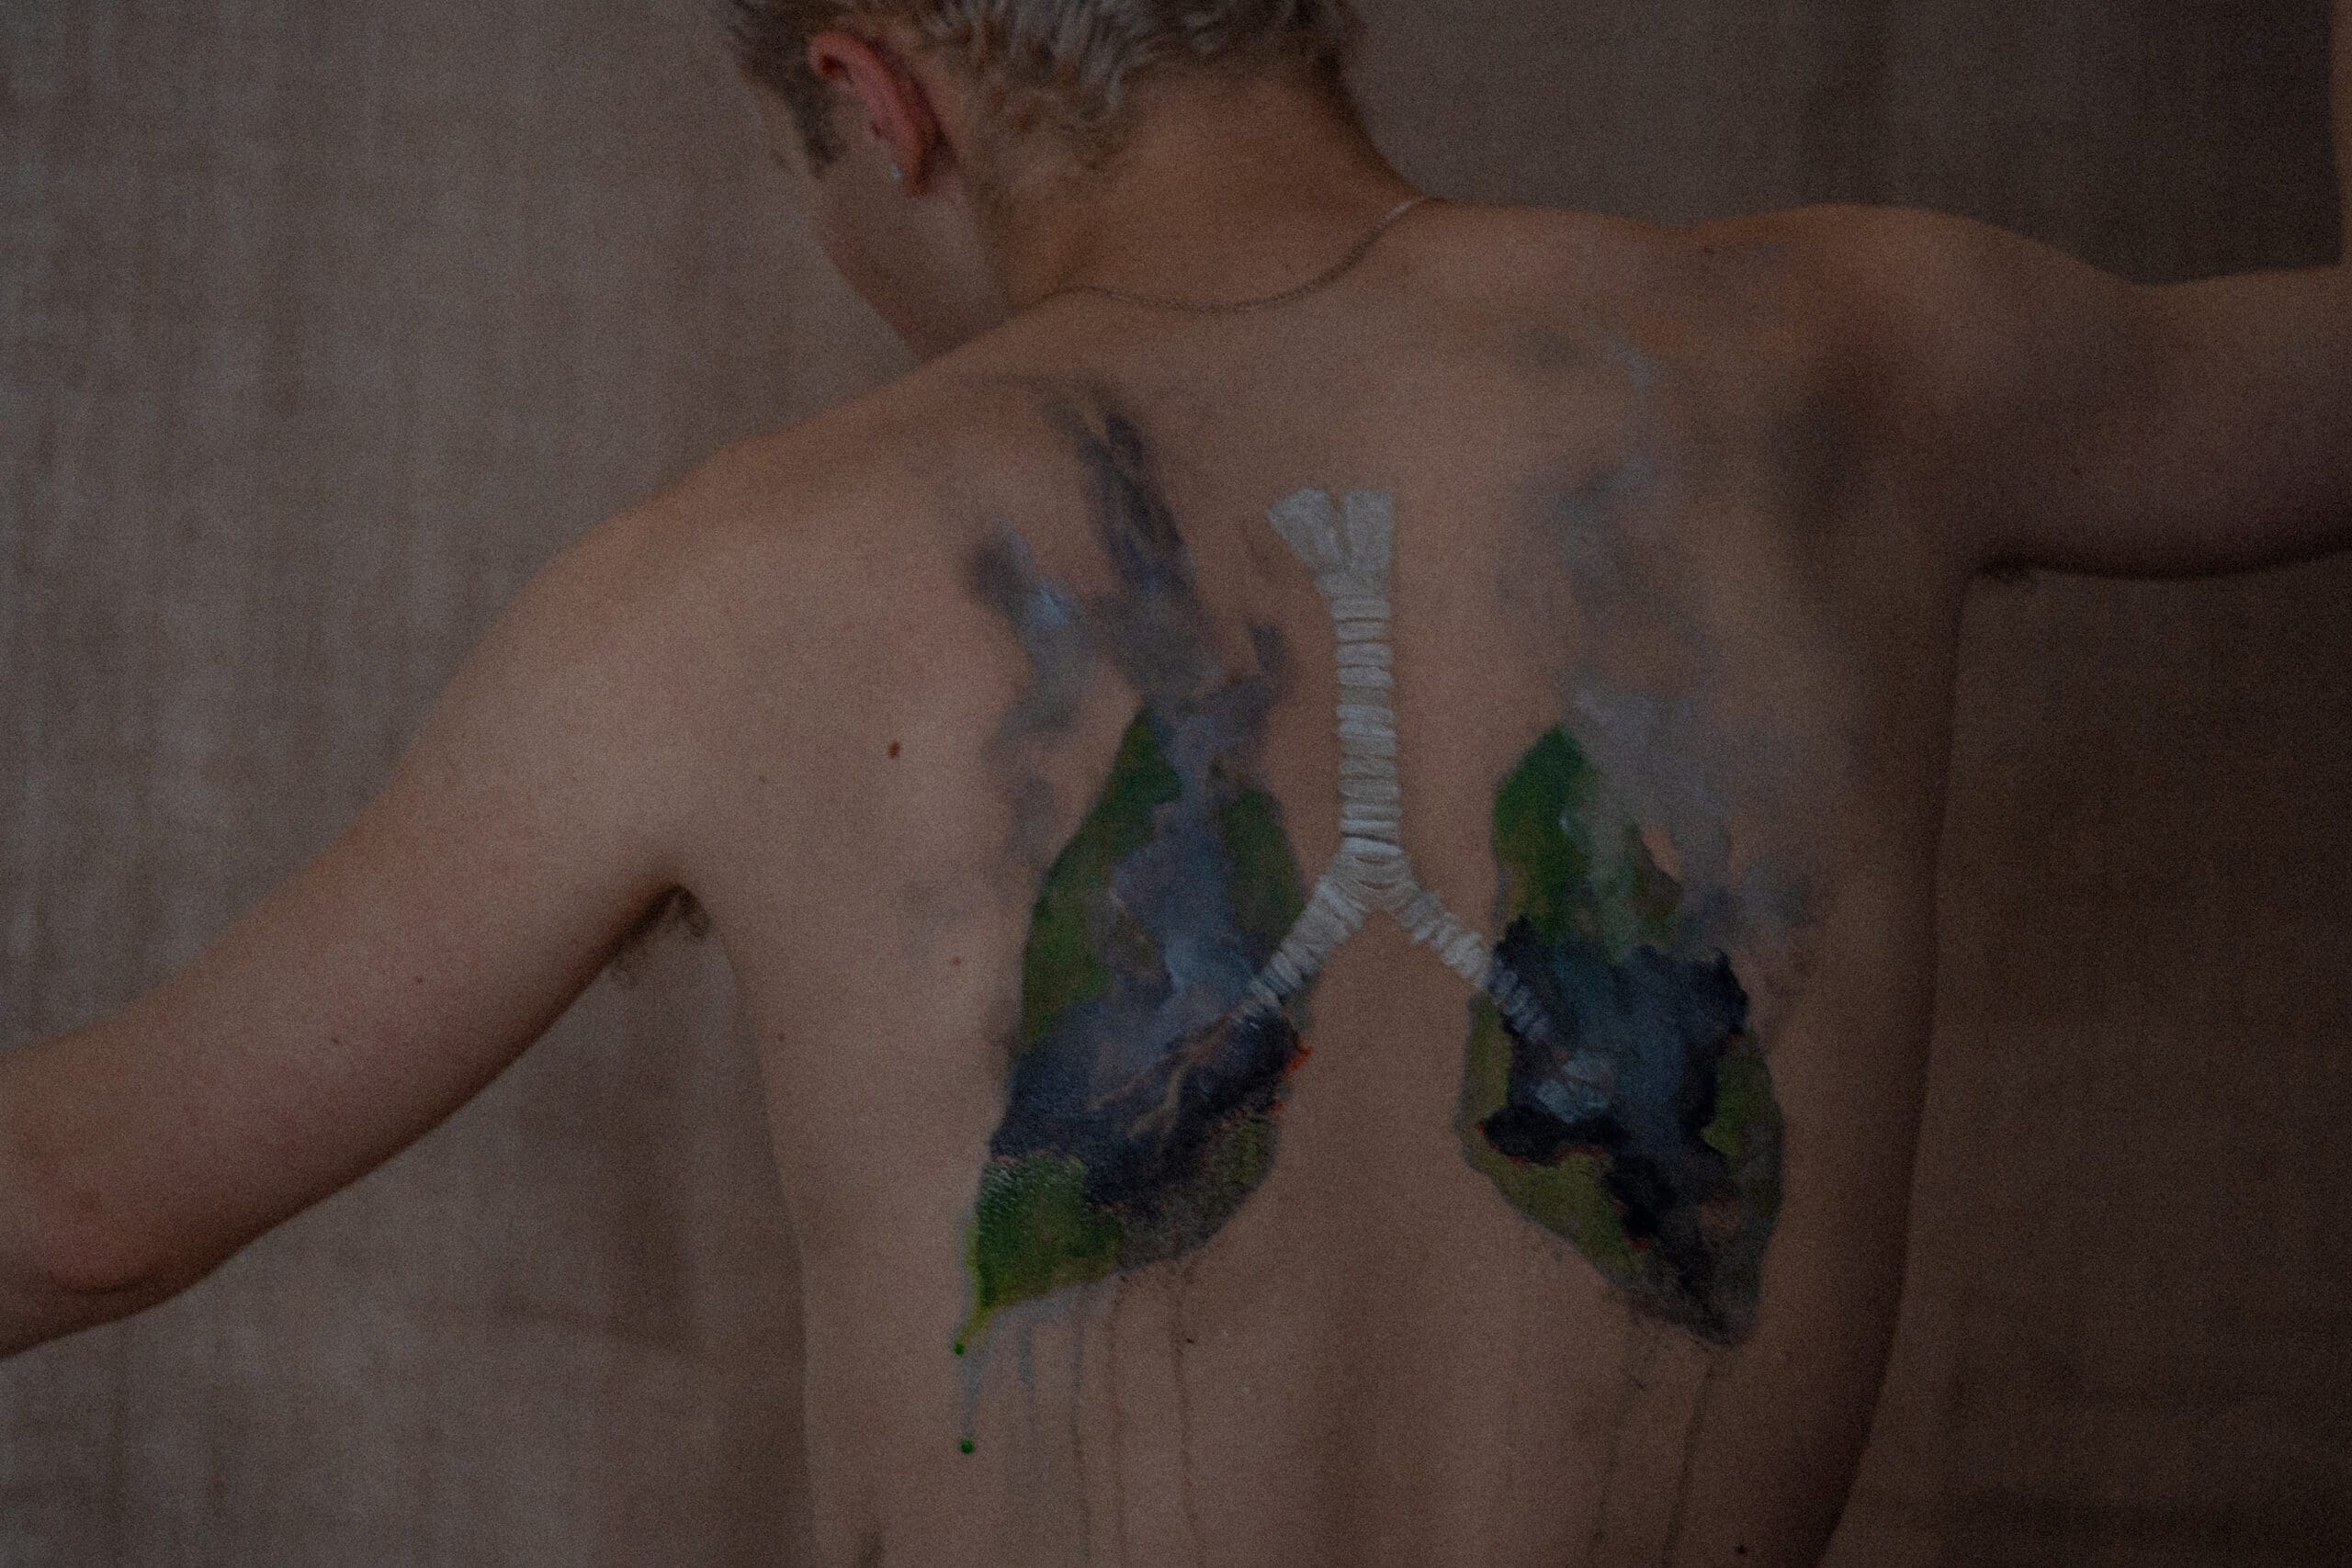 Lungs, in the shape of the Amazon and central Africa painted on a young White man's back